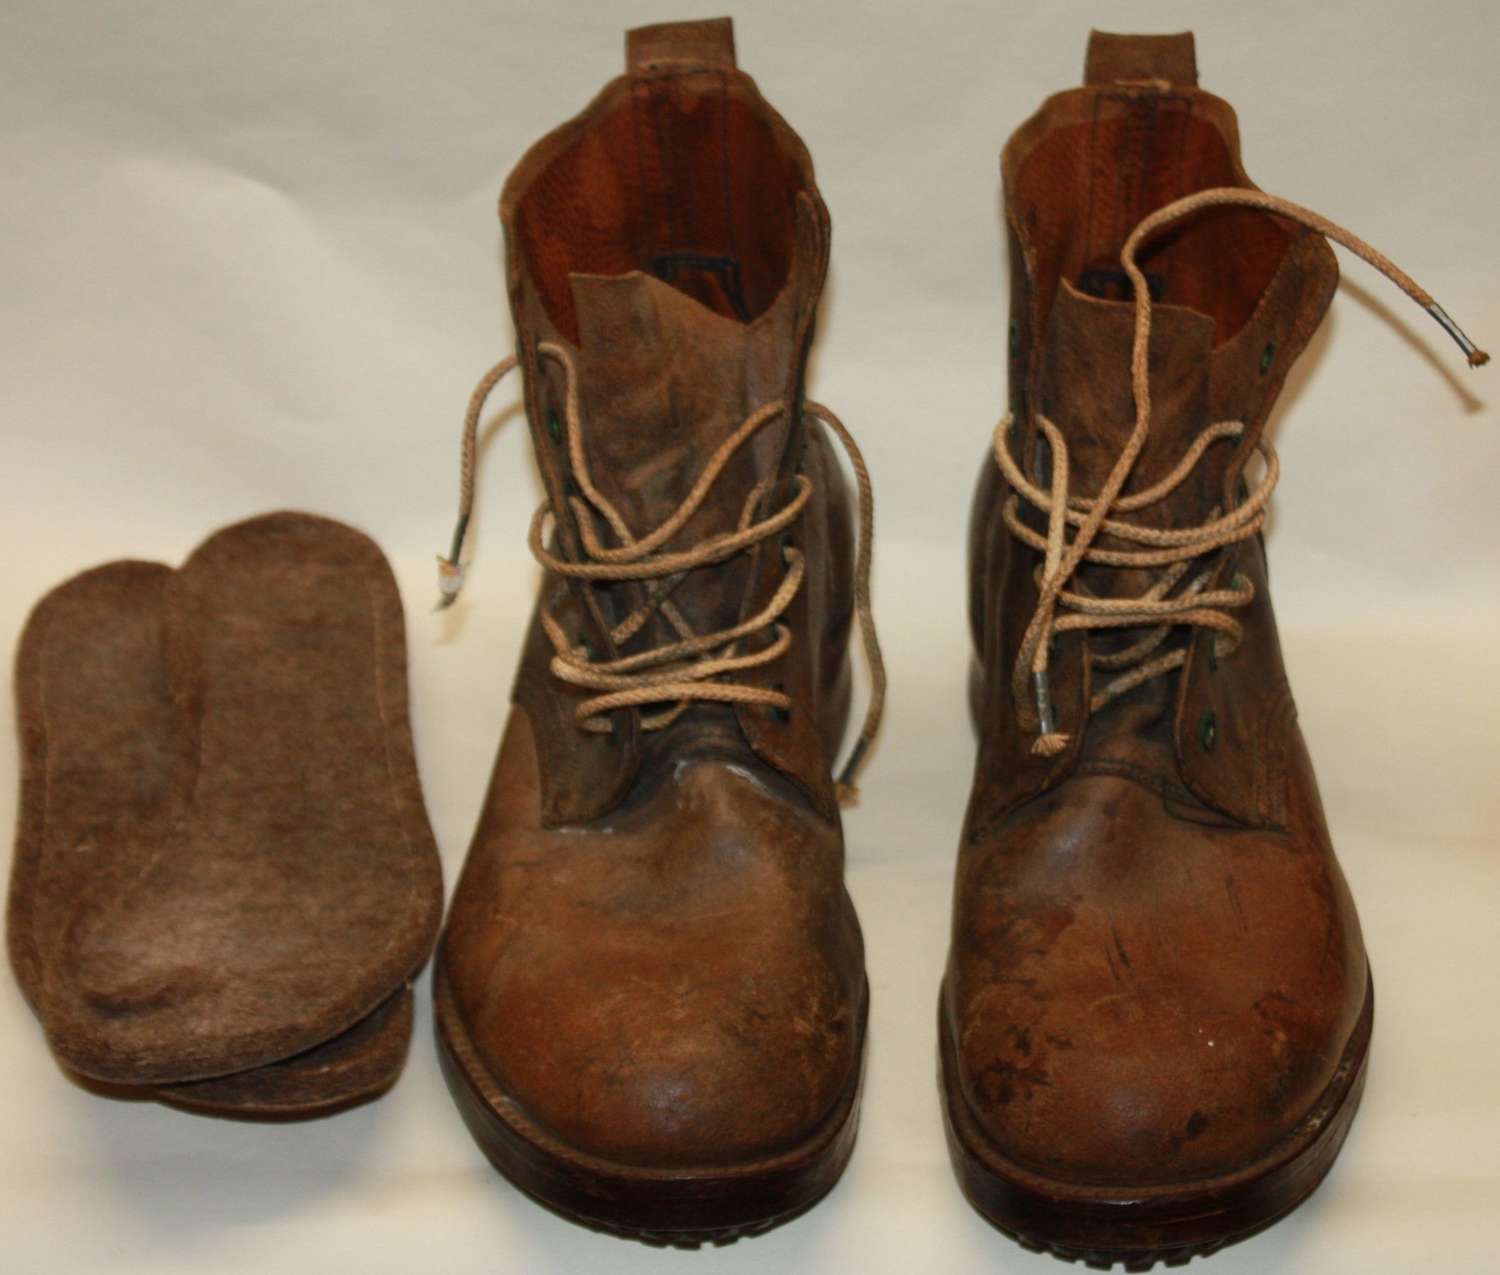 WWII BRITISH PAIR OF BOOTS FP  ( FINISH PATTERN ) 1944 DATED